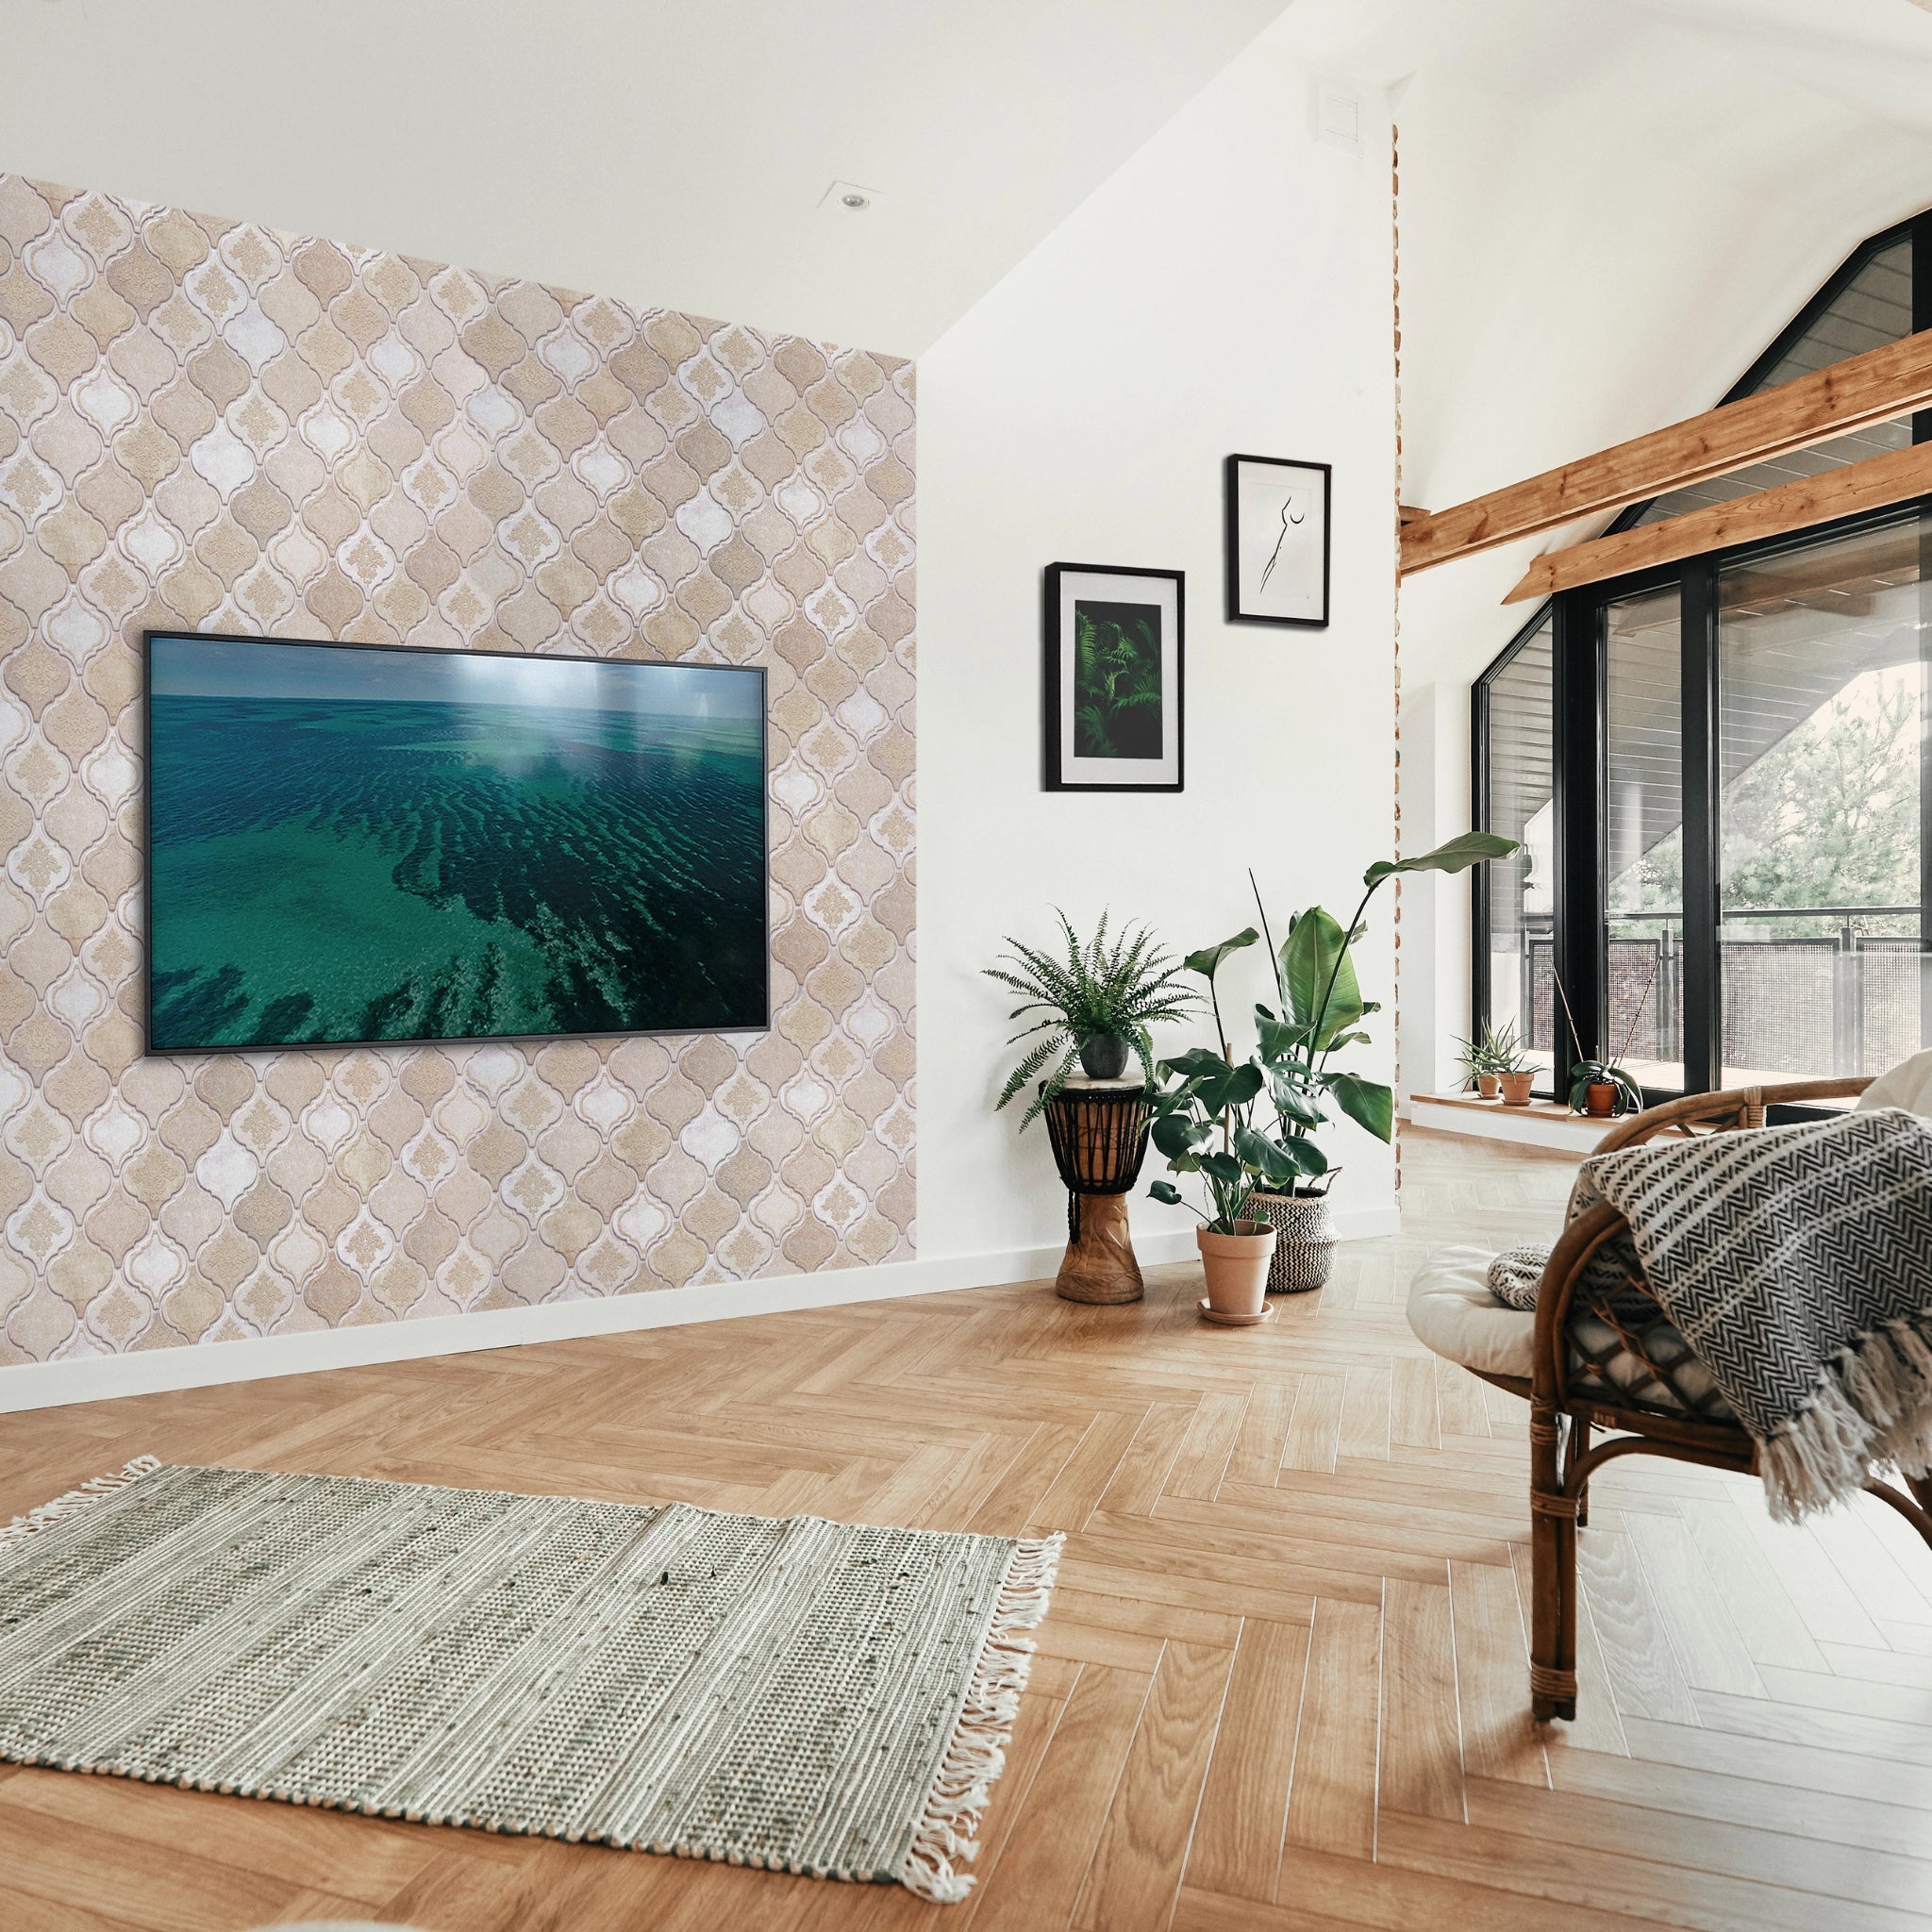 Modern living room with beige wall panel featuring geometric patterns